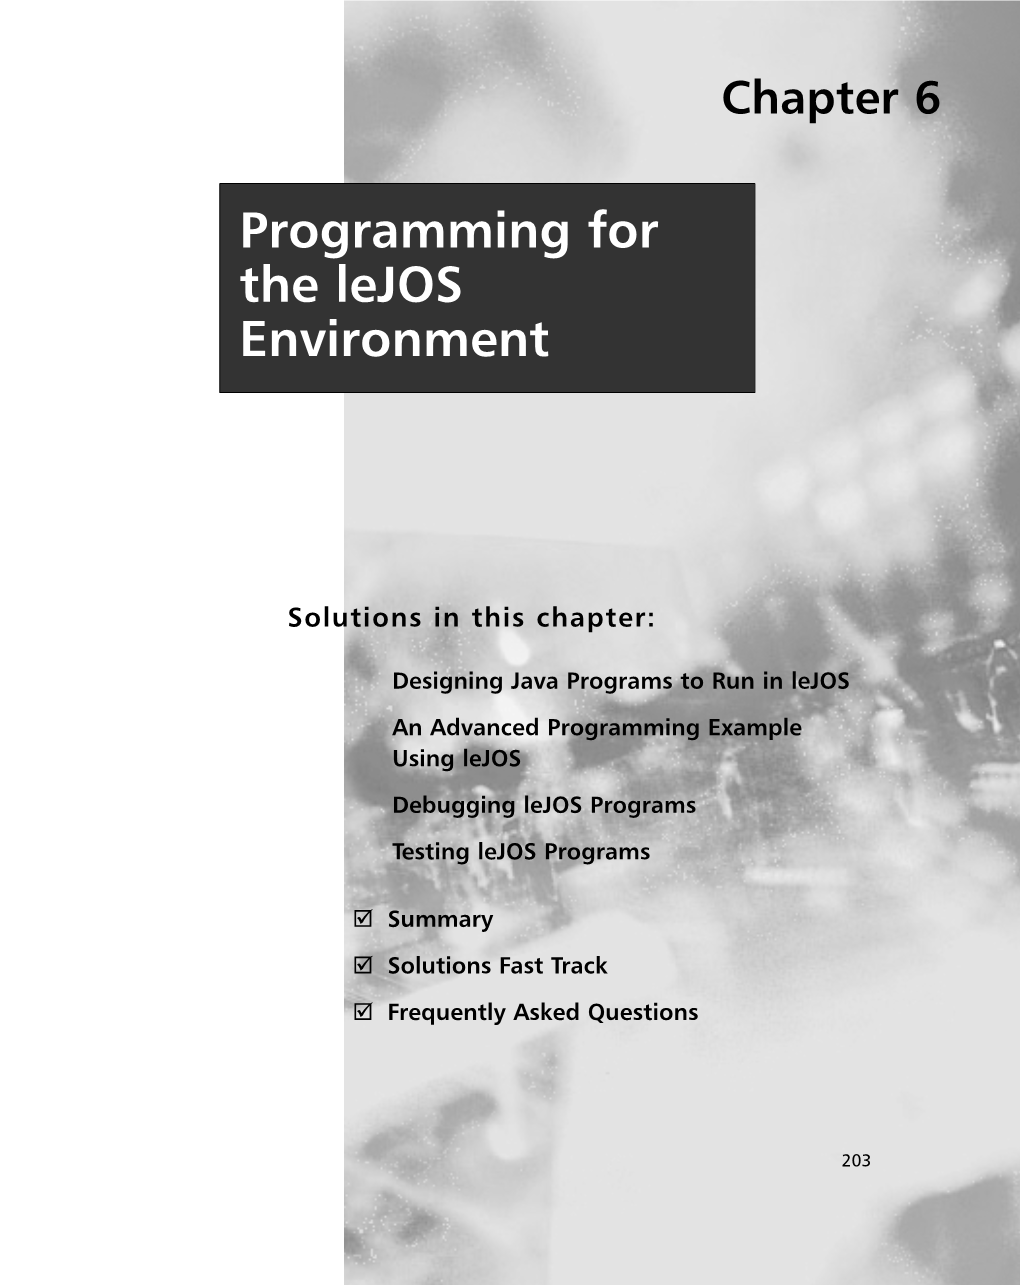 Programming for the Lejos Environment